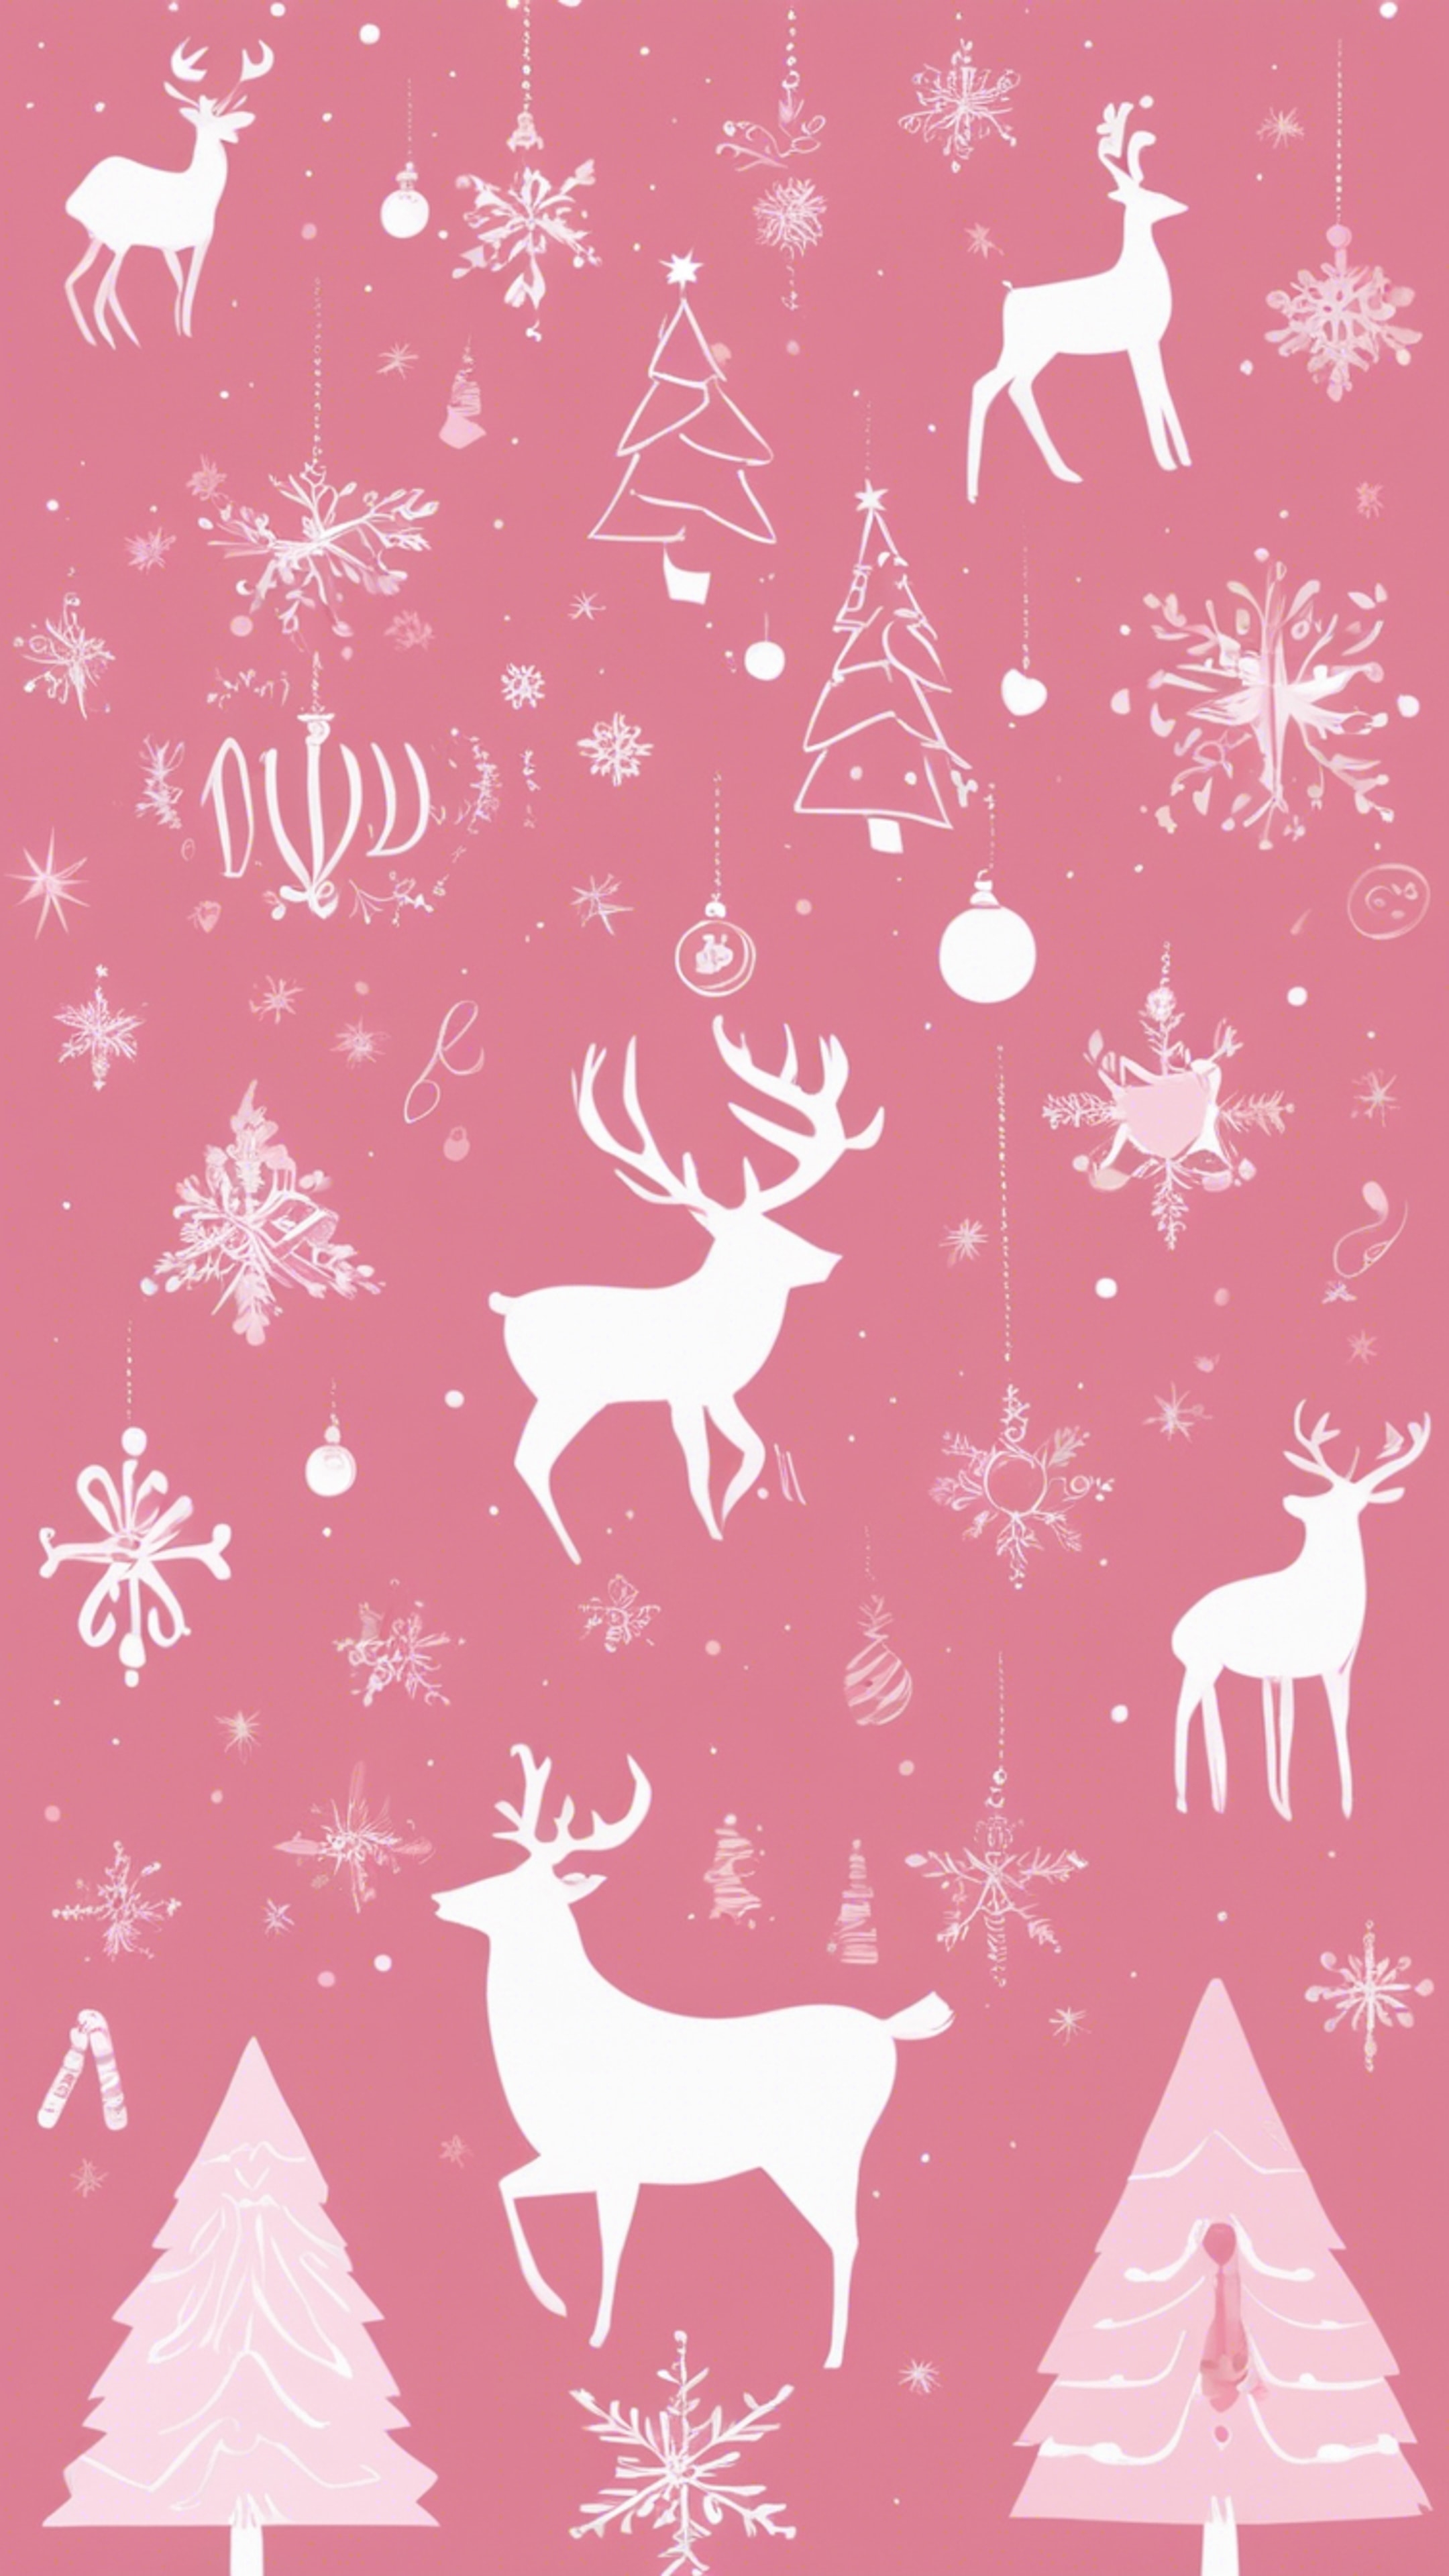 A minimally designed Christmas card with elegant pink illustrations of Christmas icons. Kertas dinding[9459a801713f4624aabe]